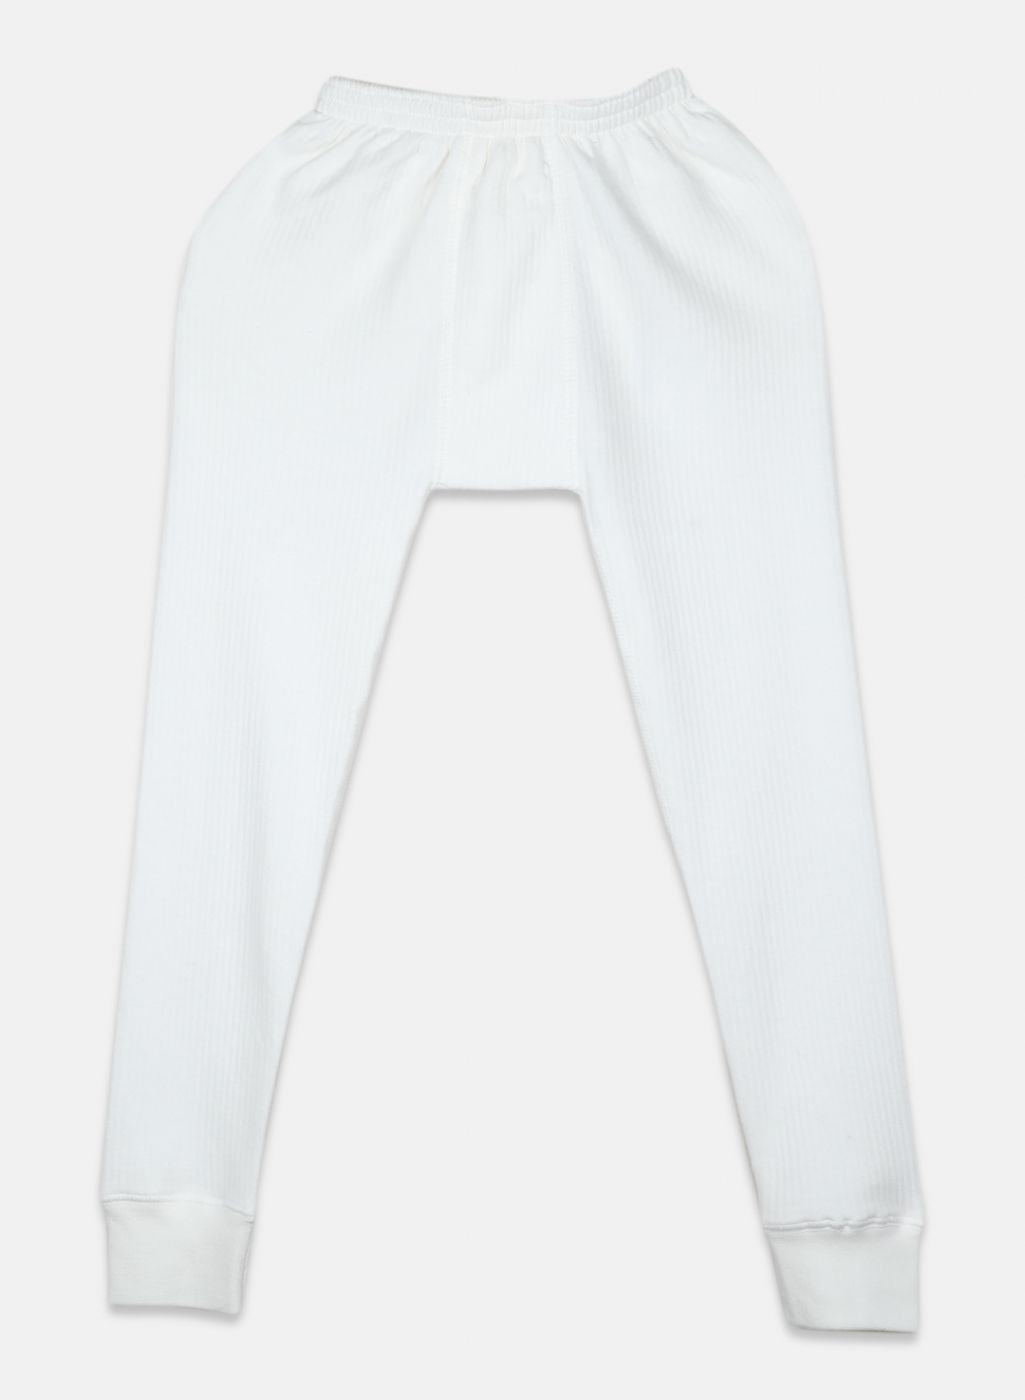 Boys Off White Solid Thermal Lower